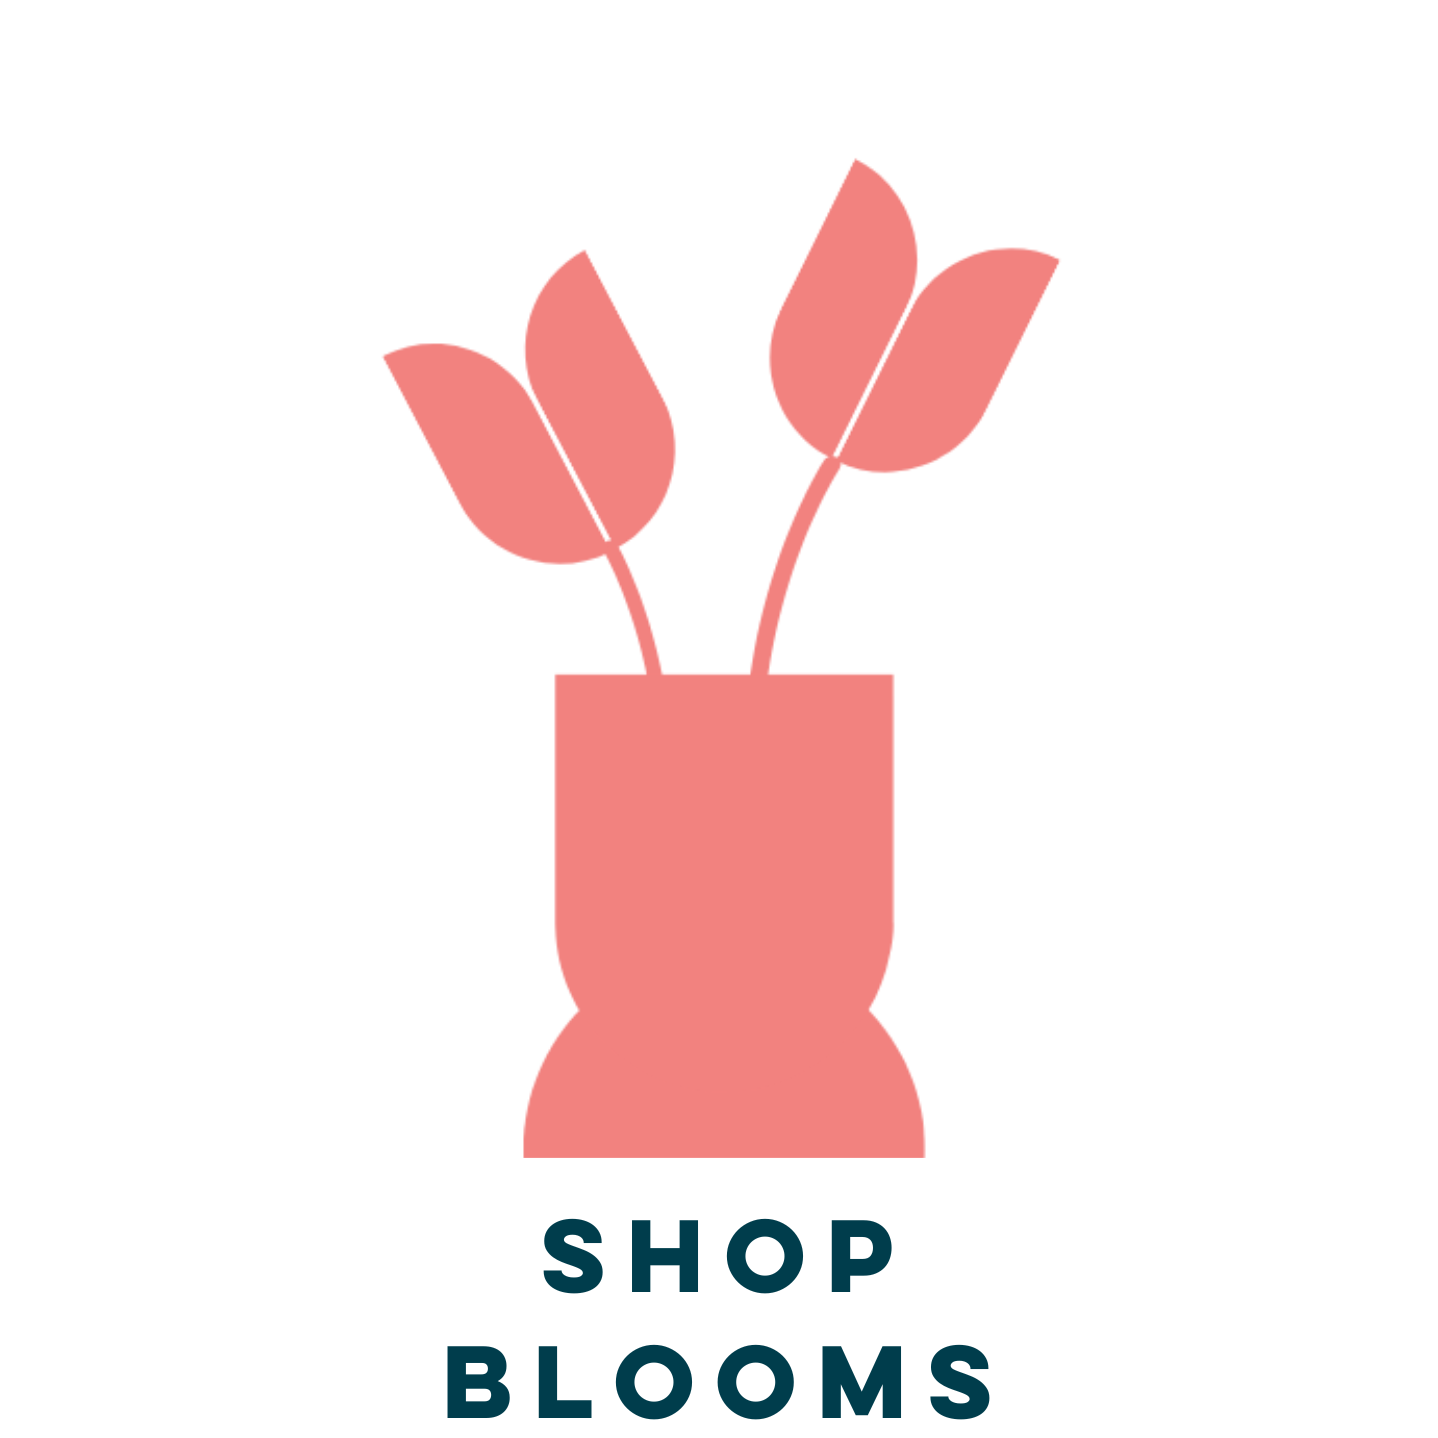 Shop Blooms icon with words.png__PID:f195b85d-68b1-4cbd-9660-f095e4bc5895